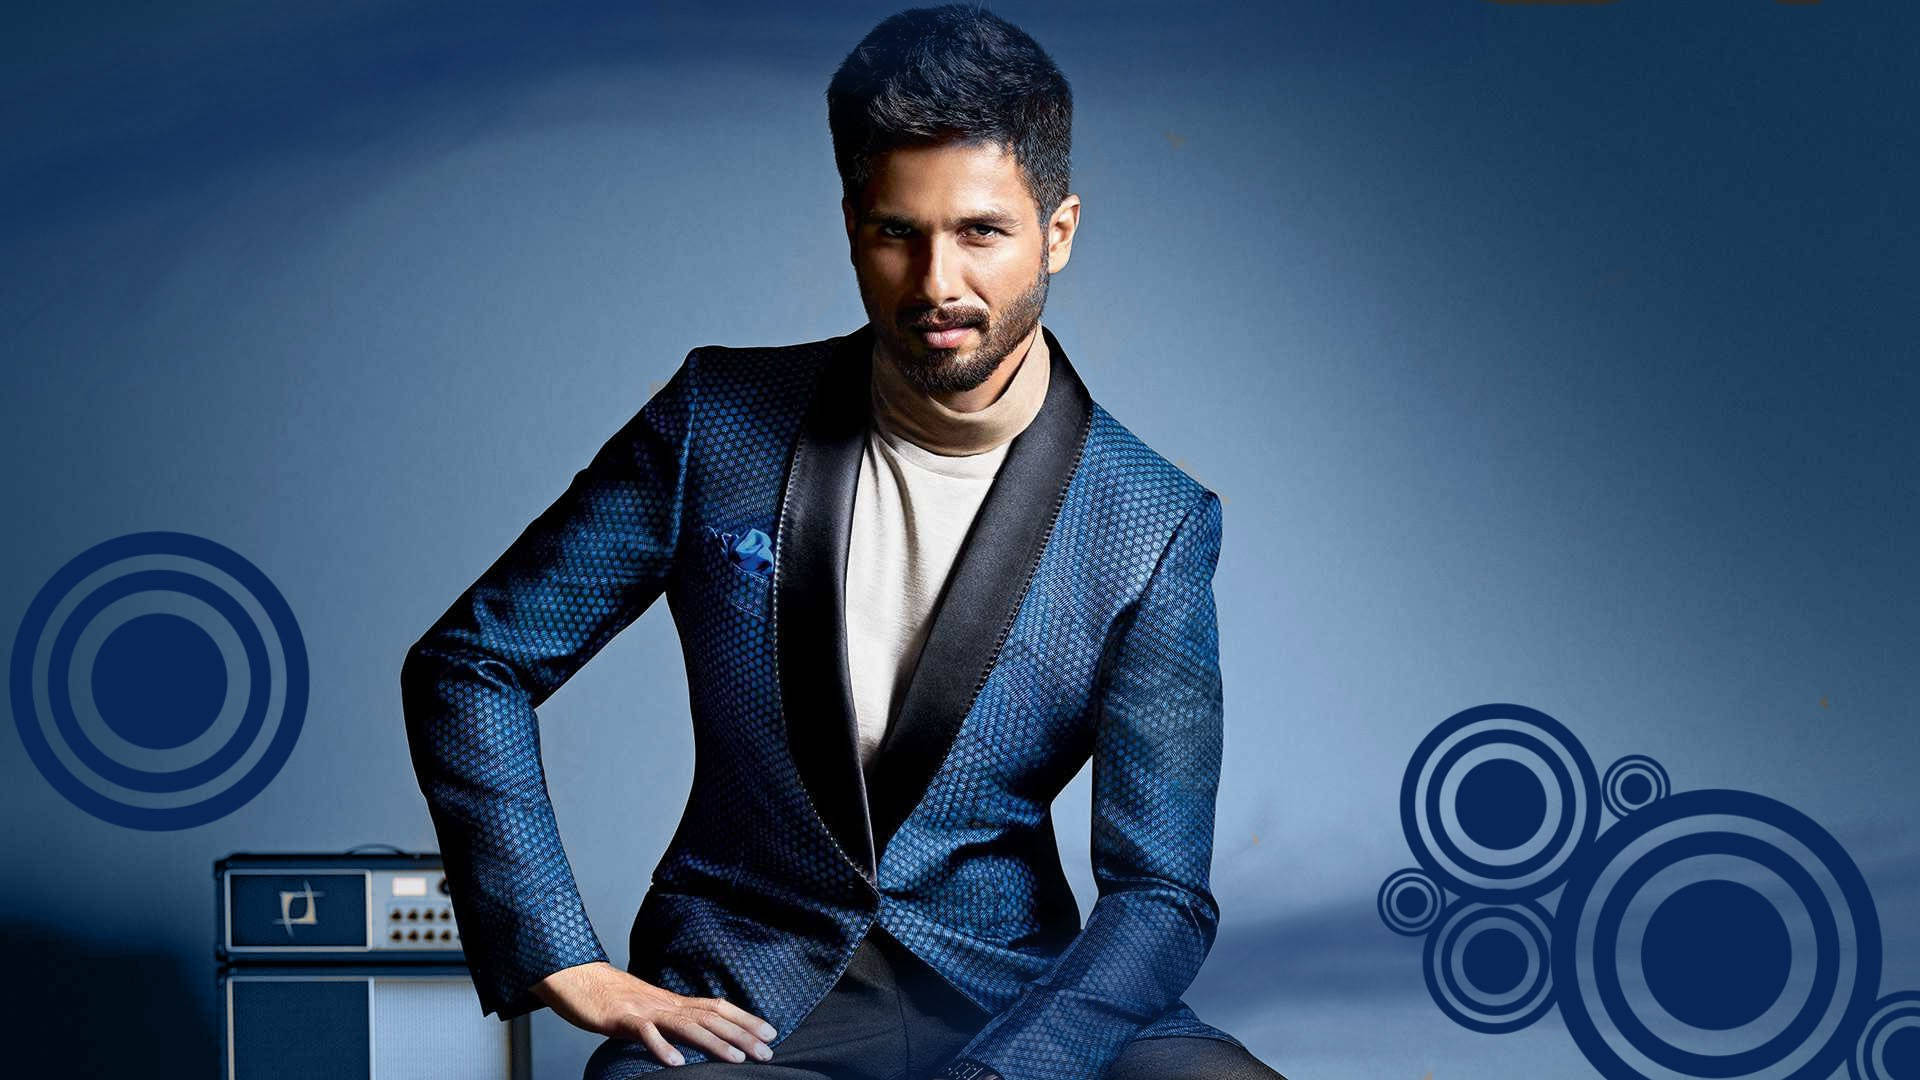 Shahid Kapoor In Formal Attire Background